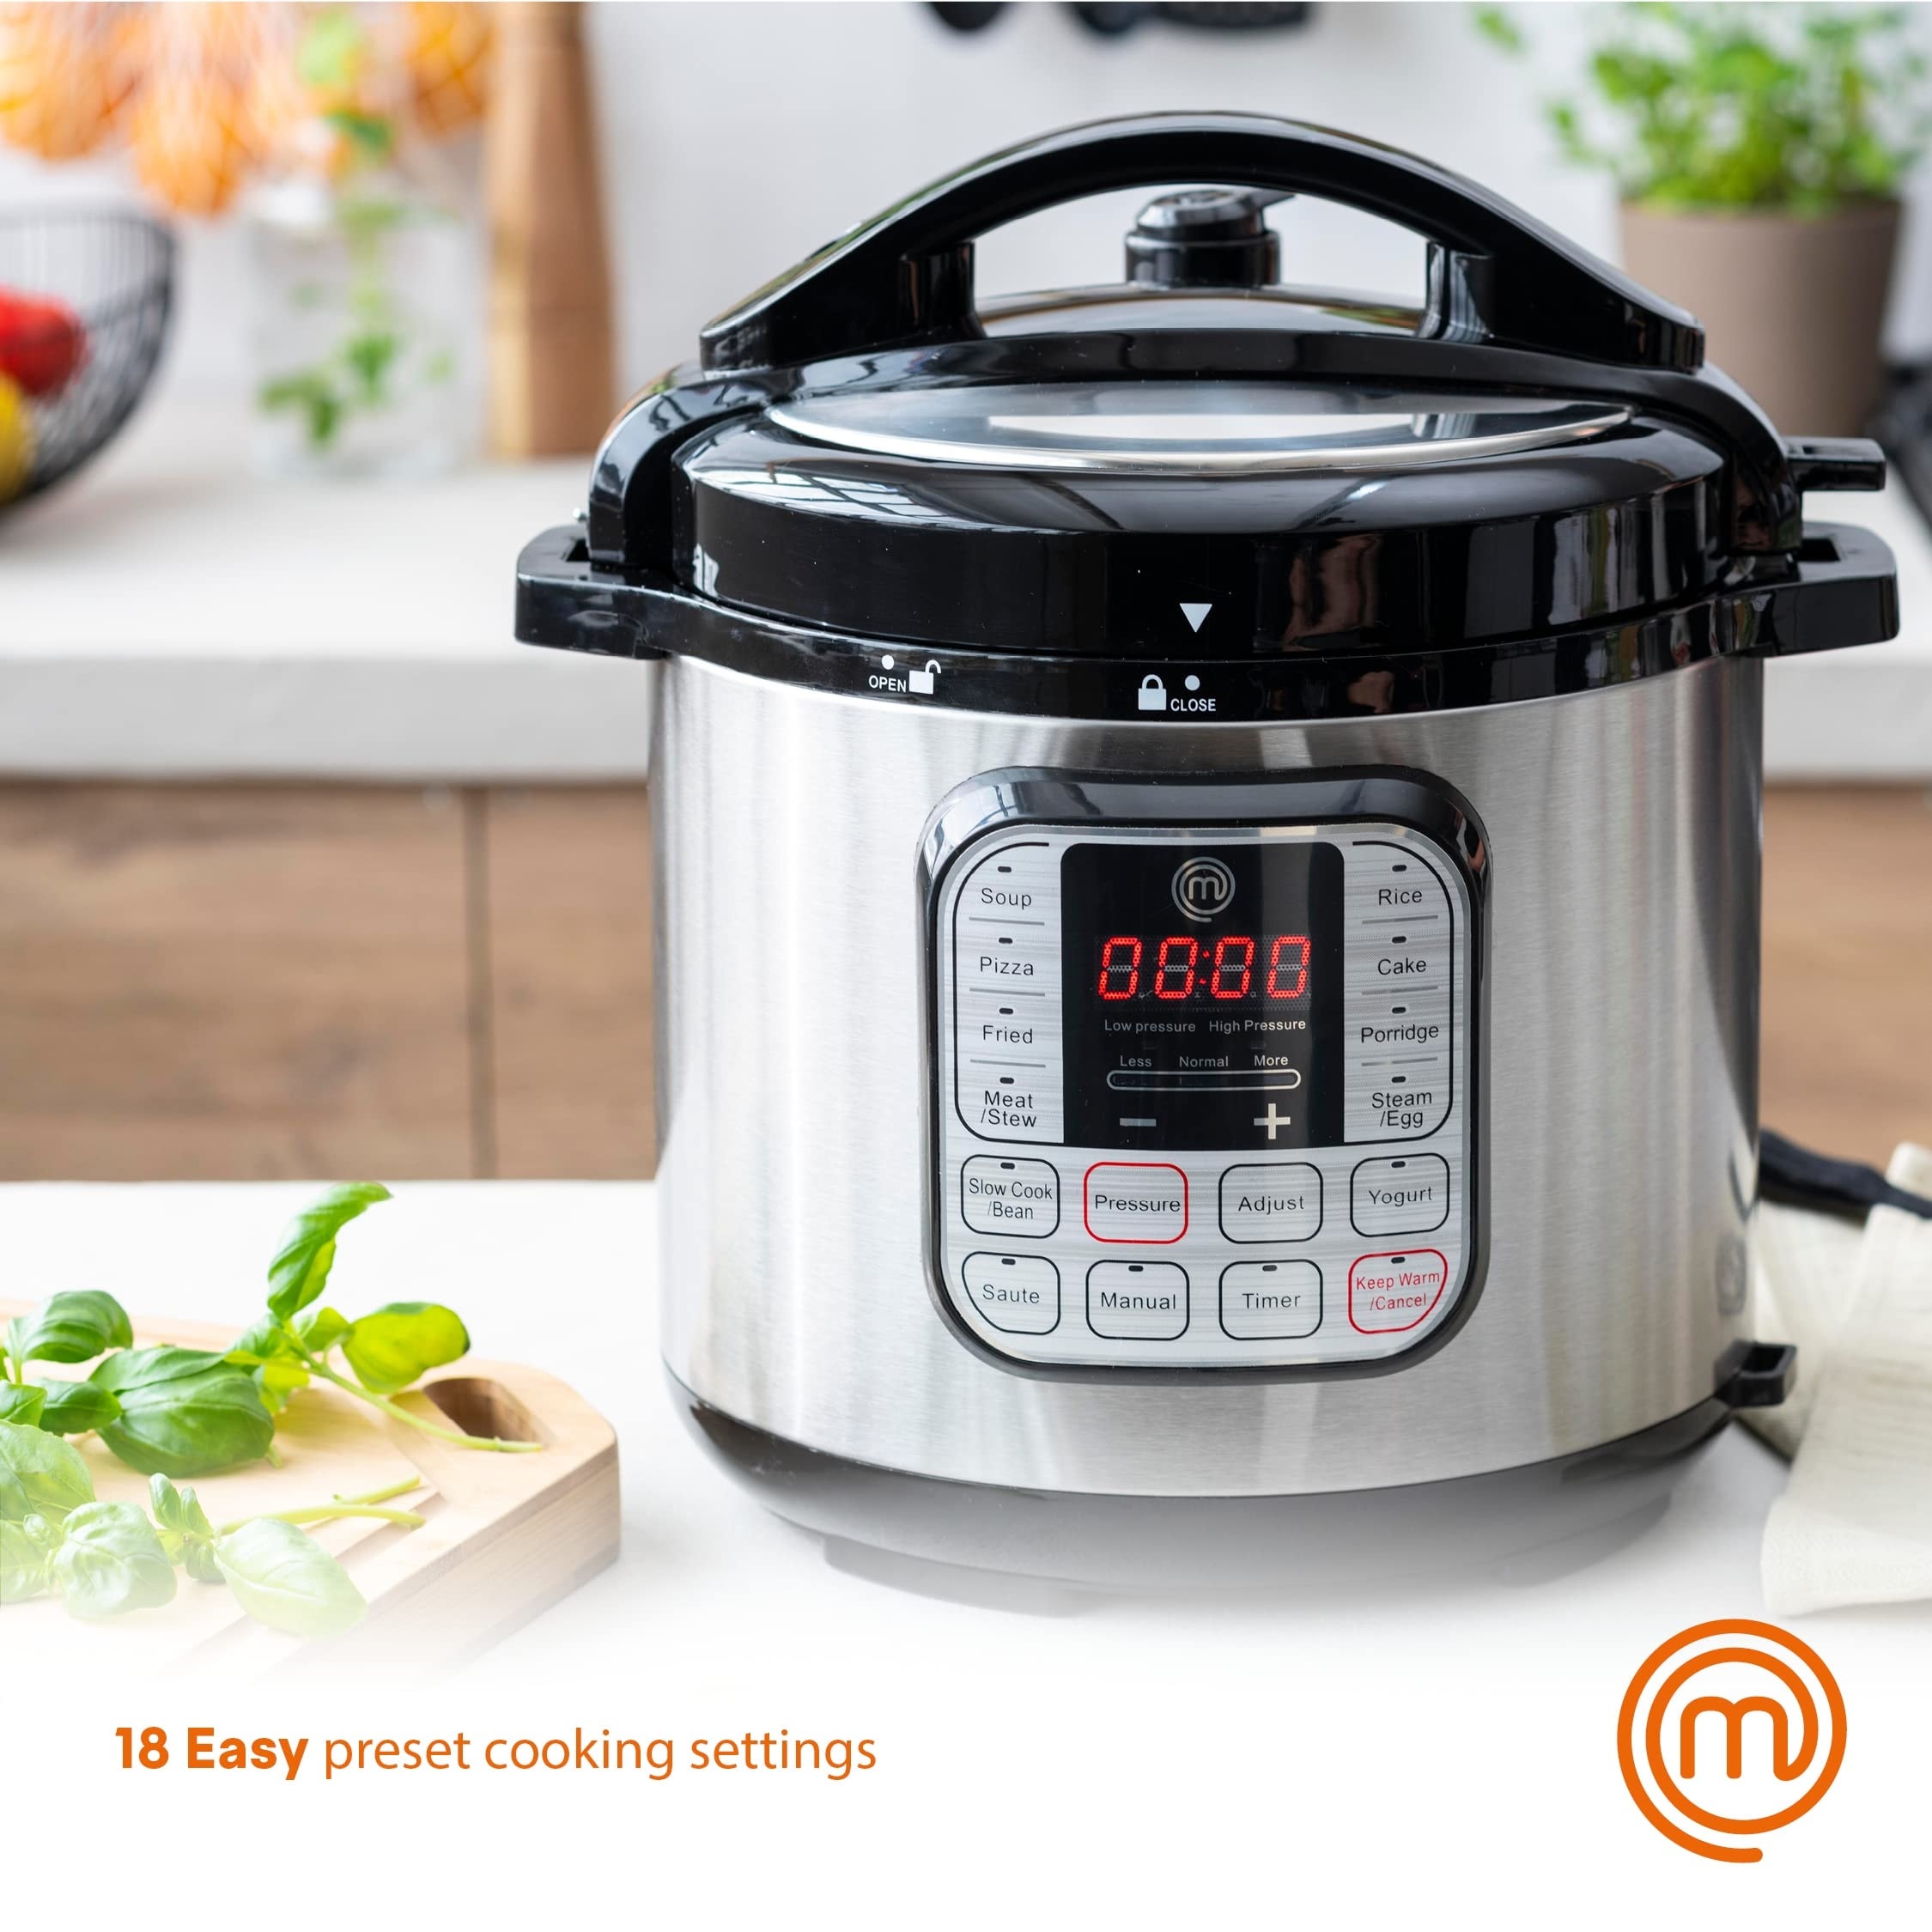 https://ak1.ostkcdn.com/images/products/is/images/direct/8fe0feaf7d00bdb9b570d689f0ece30f8b76cc7a/6-Qt-Electric-Pressure-Cooker%2C-Instapot-Multicooker%2C-Immersion-Blender-Handheld-with-Electric-Whisk-%26-Milk-Frother-Attachments.jpg